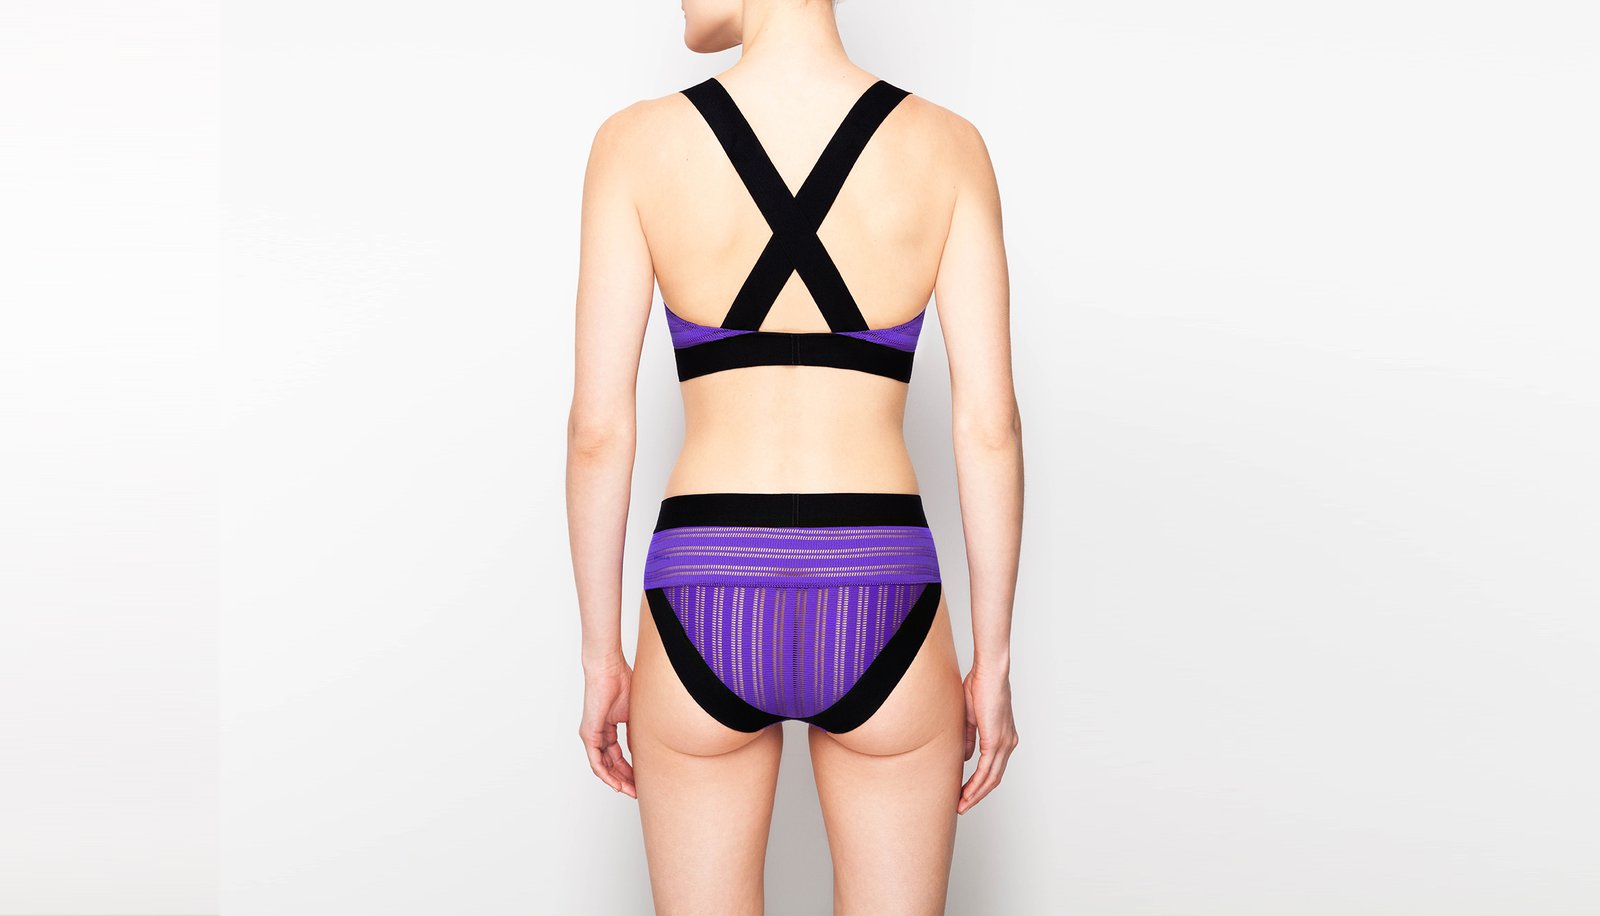 Minimalist Lingerie: Opaak's Framed Allure Collection